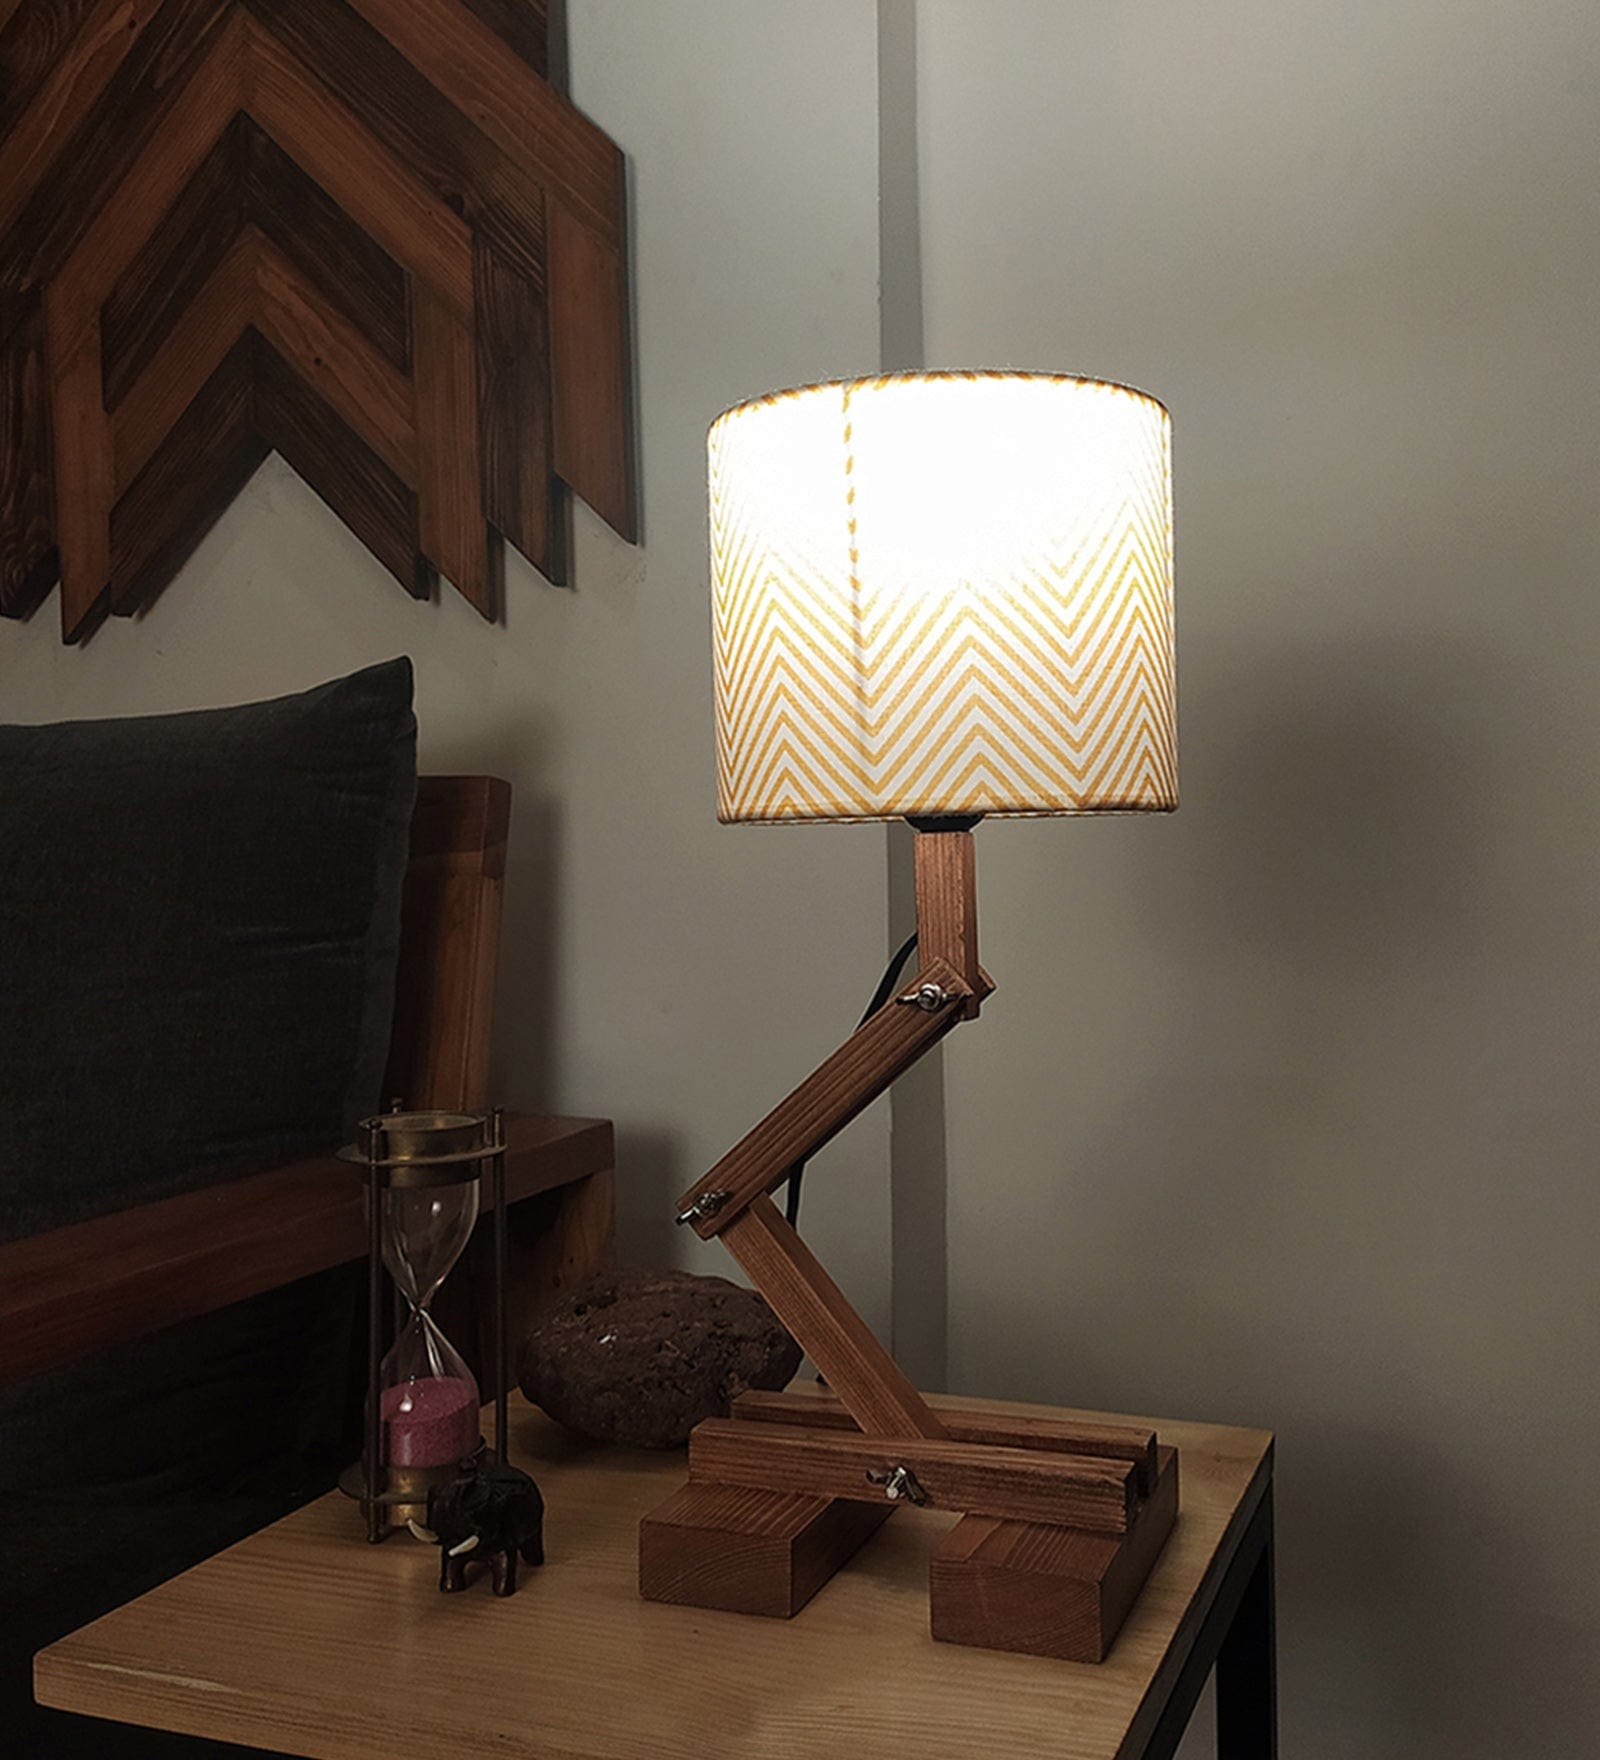 Flex Brown Wooden Table Lamp with Yellow Printed Fabric Lampshade  (BULB NOT INCLUDED)